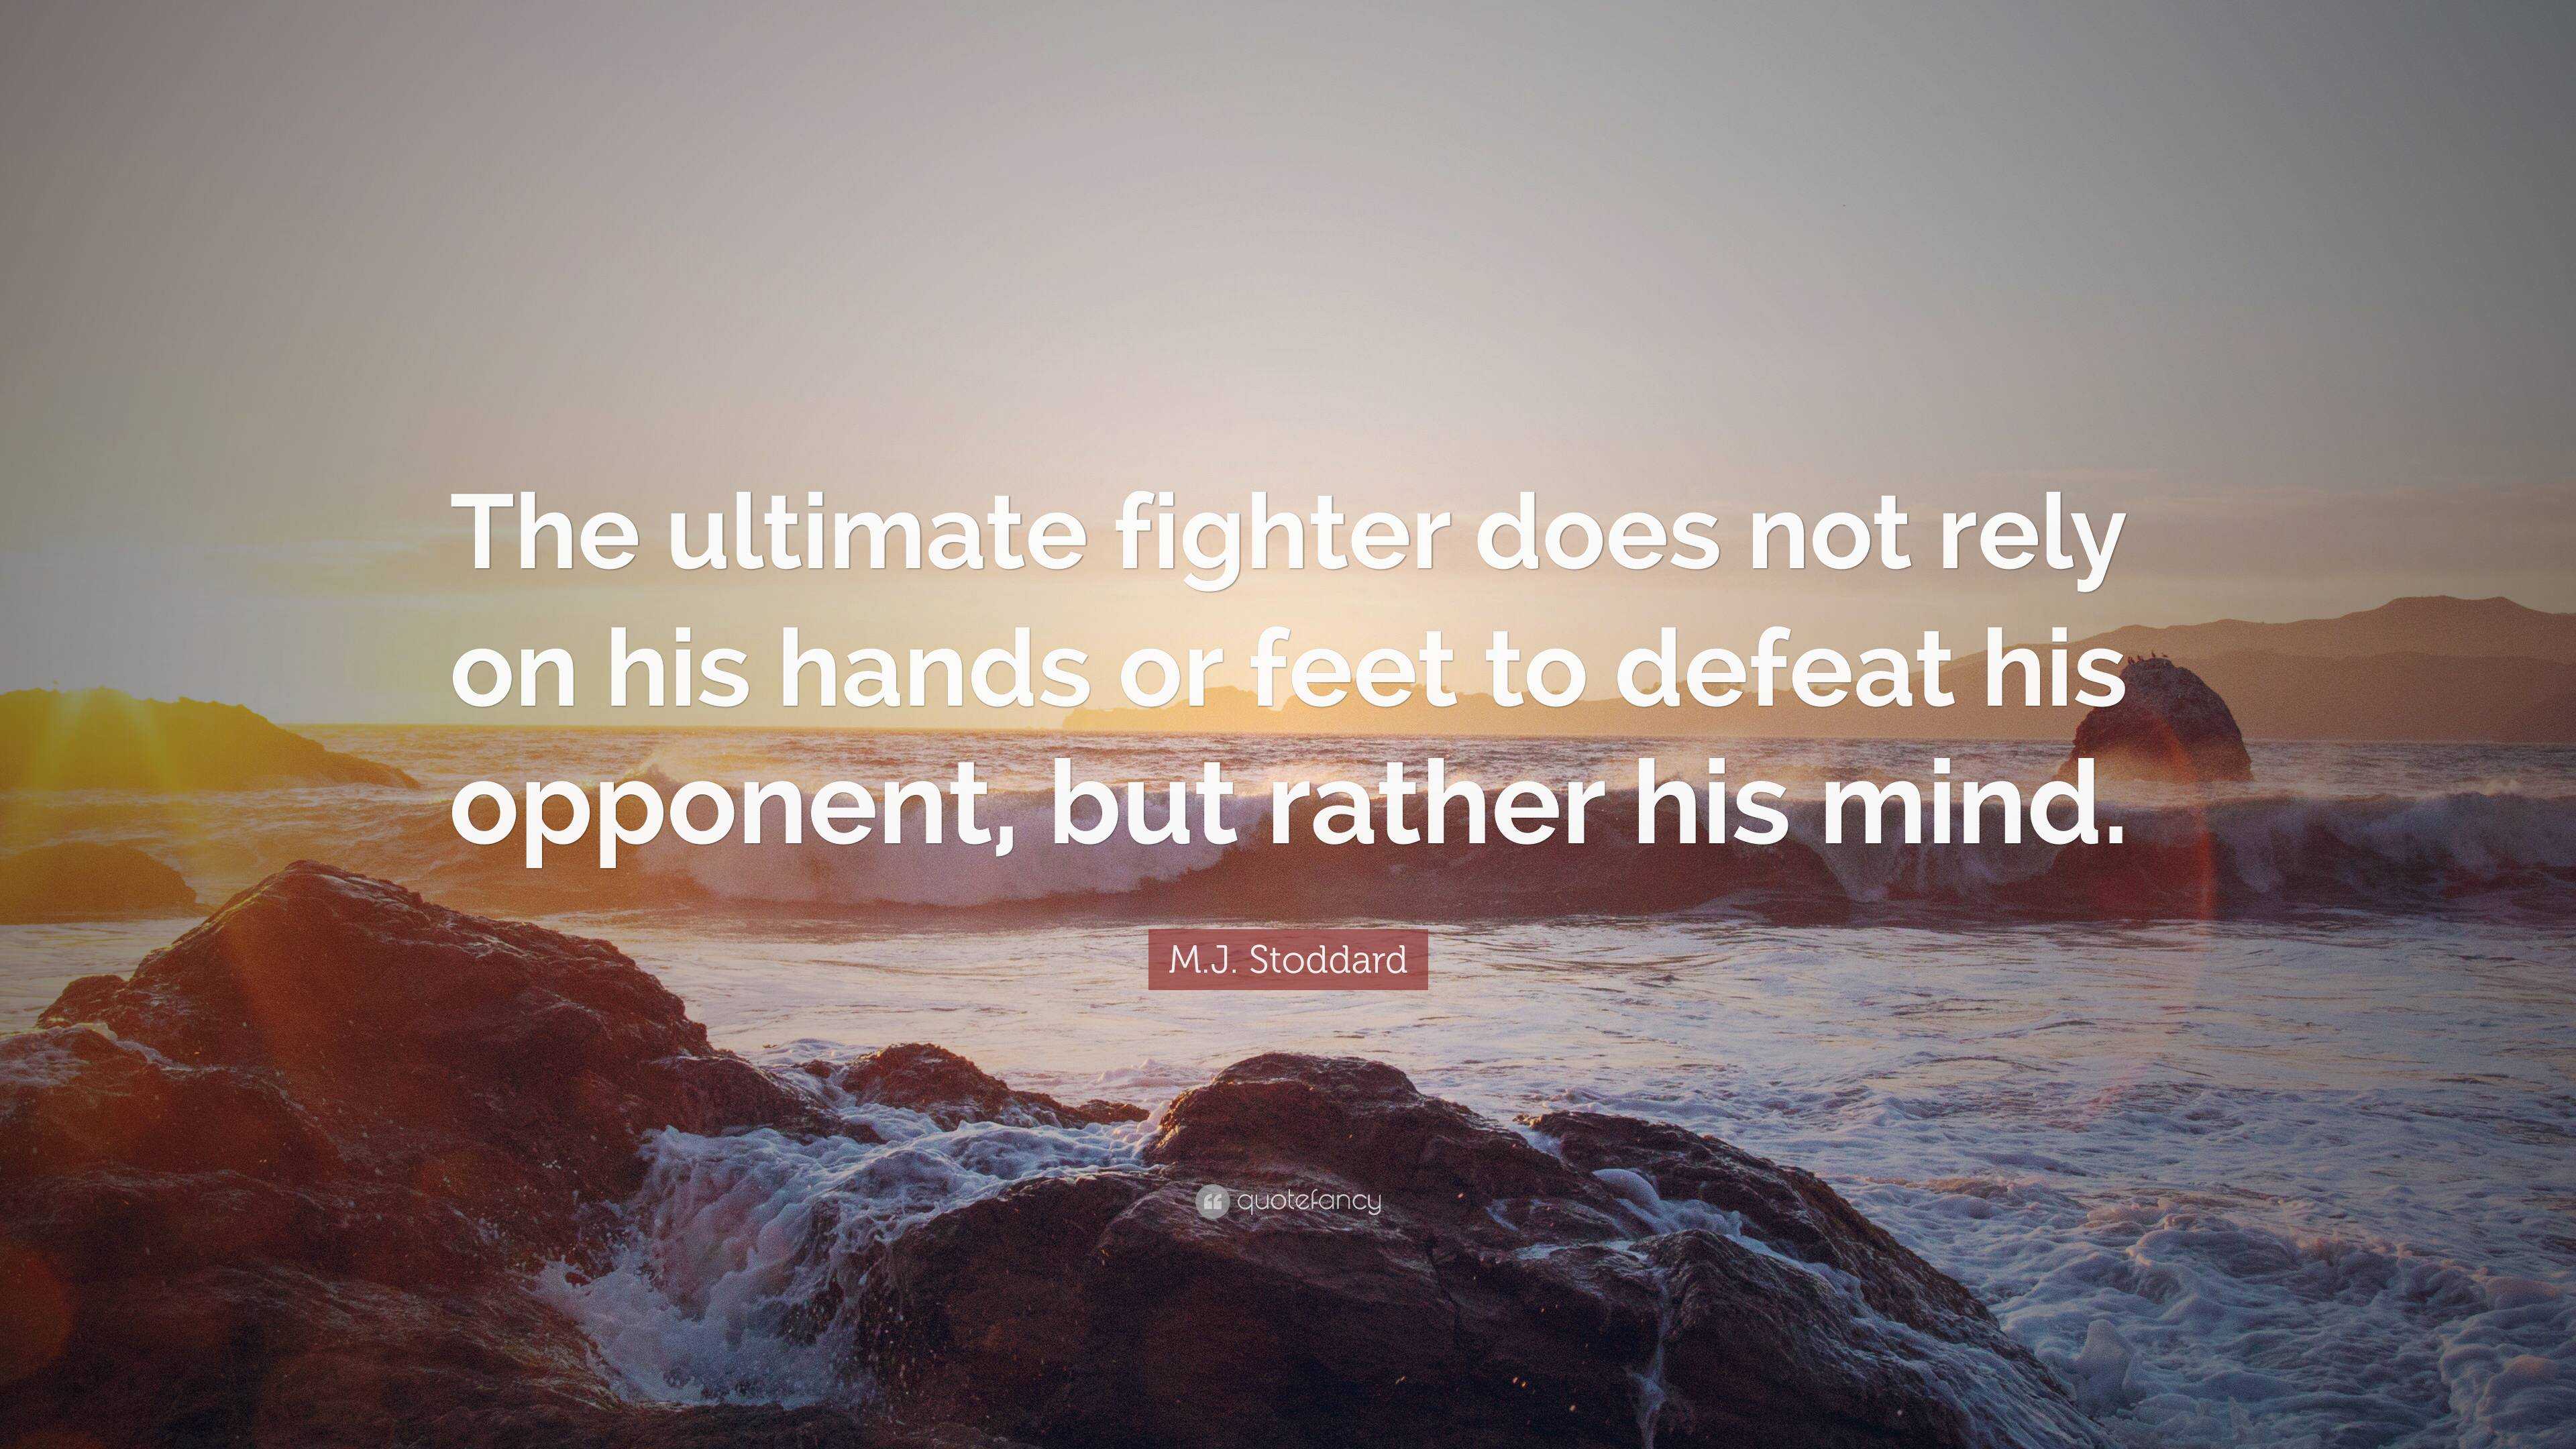 M.J. Stoddard Quote: “The ultimate fighter does not rely on his hands or  feet to defeat